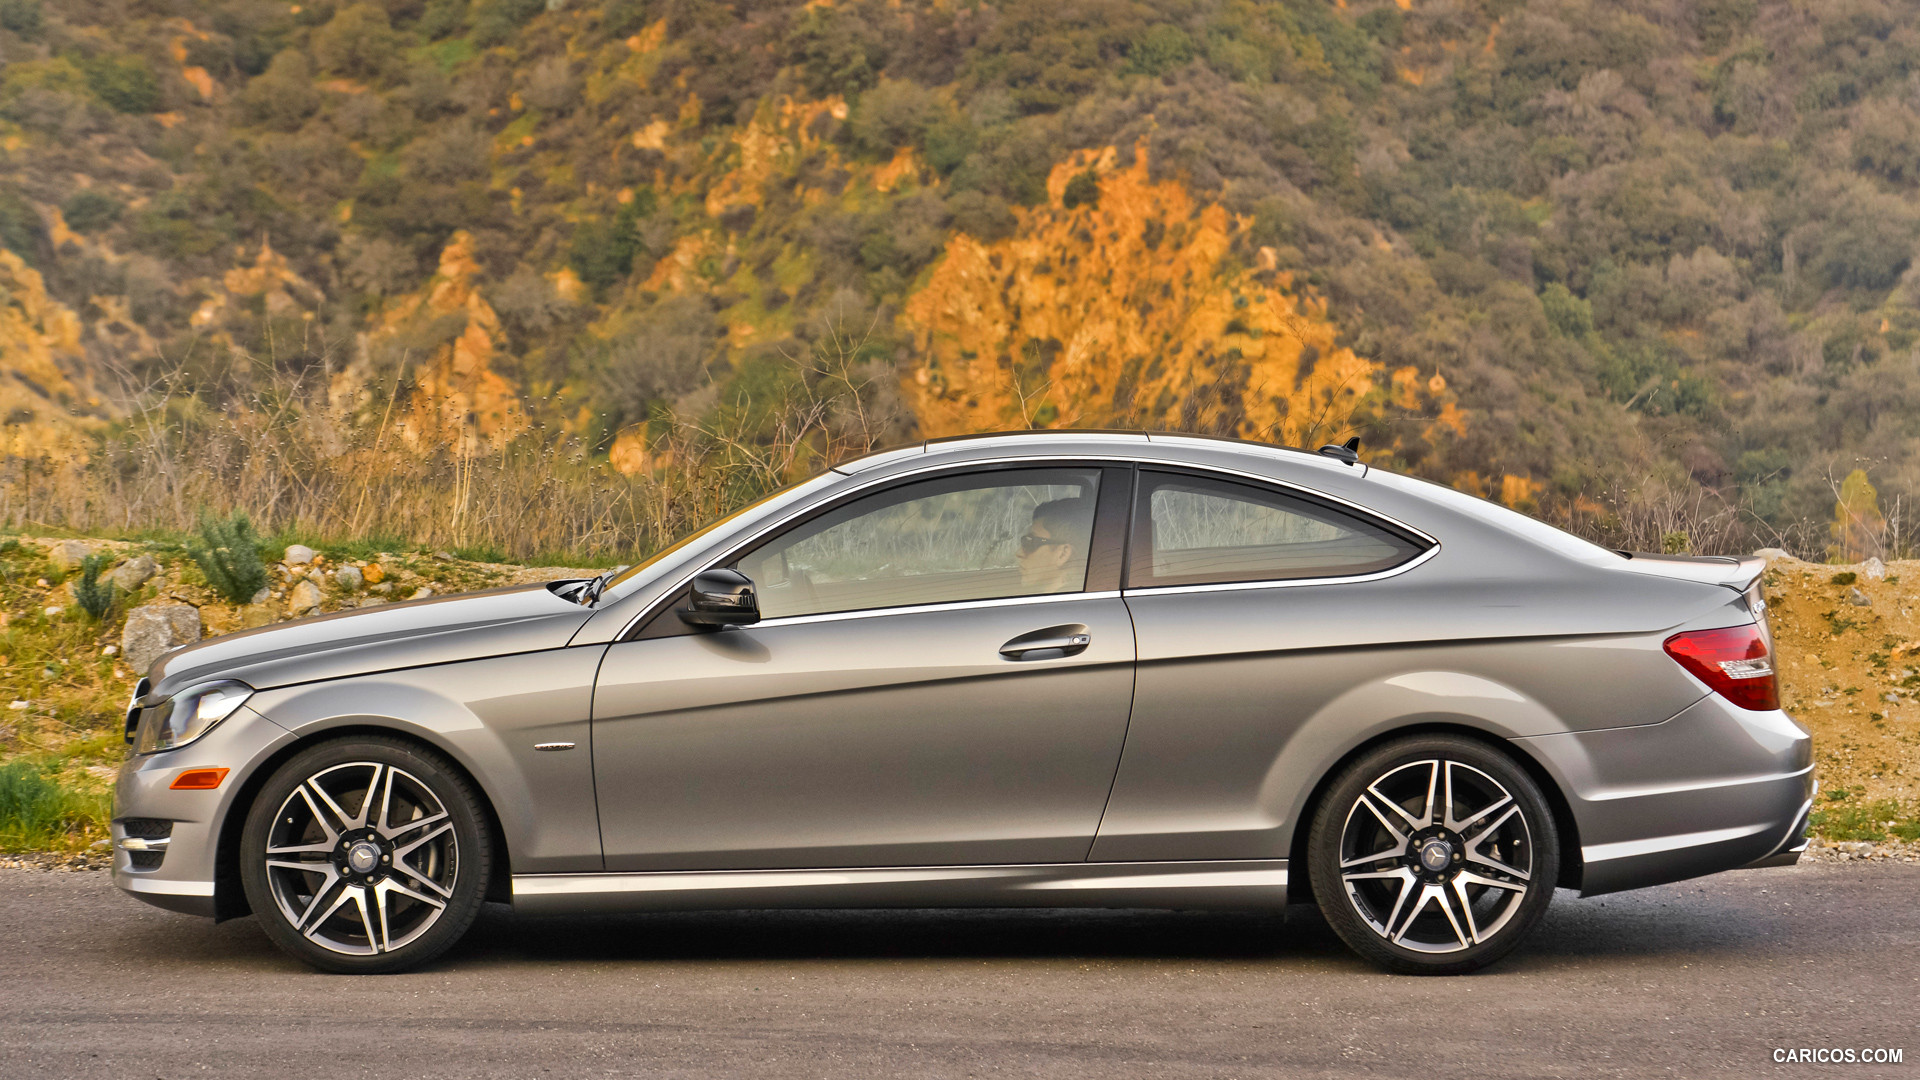 Mercedes-Benz C250 Coupe (2013)  - Side, #63 of 86